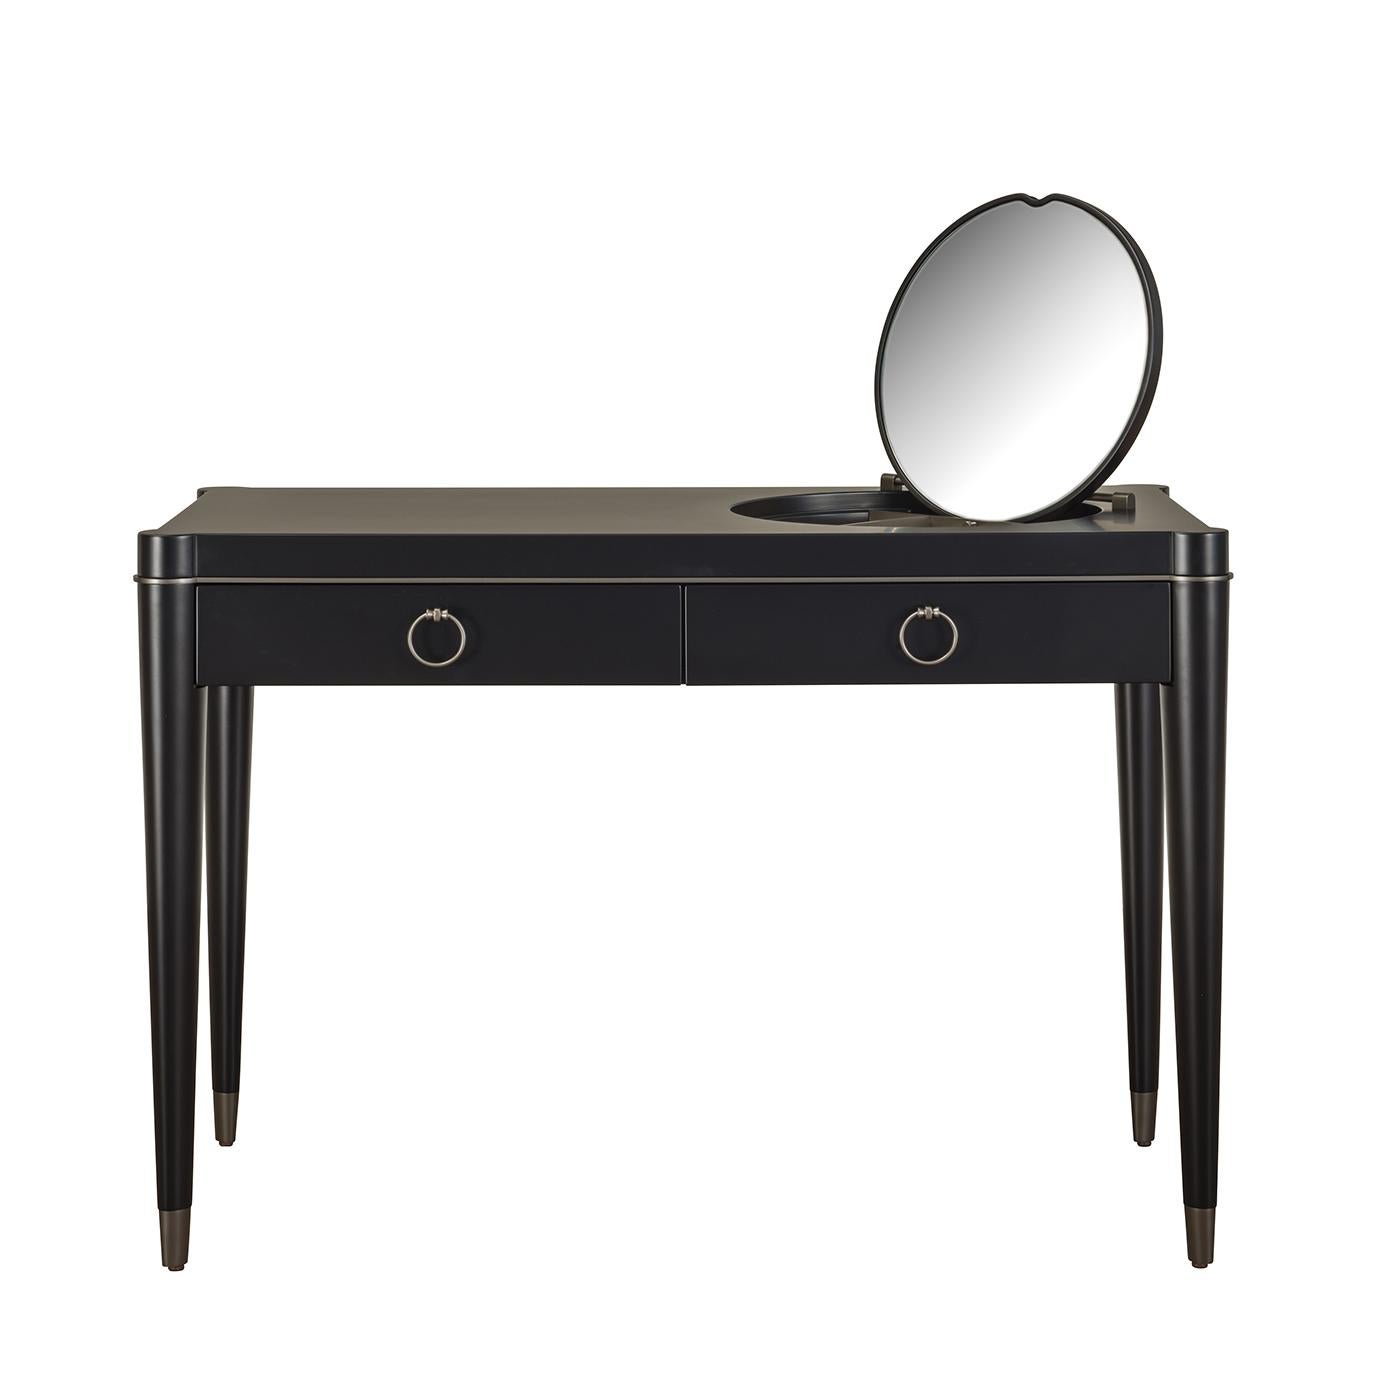 This stunning vanity desk is part of the Ambra collection of fine furniture pieces that boast a retro-chic allure and exquisite details. Its simple structure was crafted of wood with a lacquered top that hosts the round mirror, which can be hidden